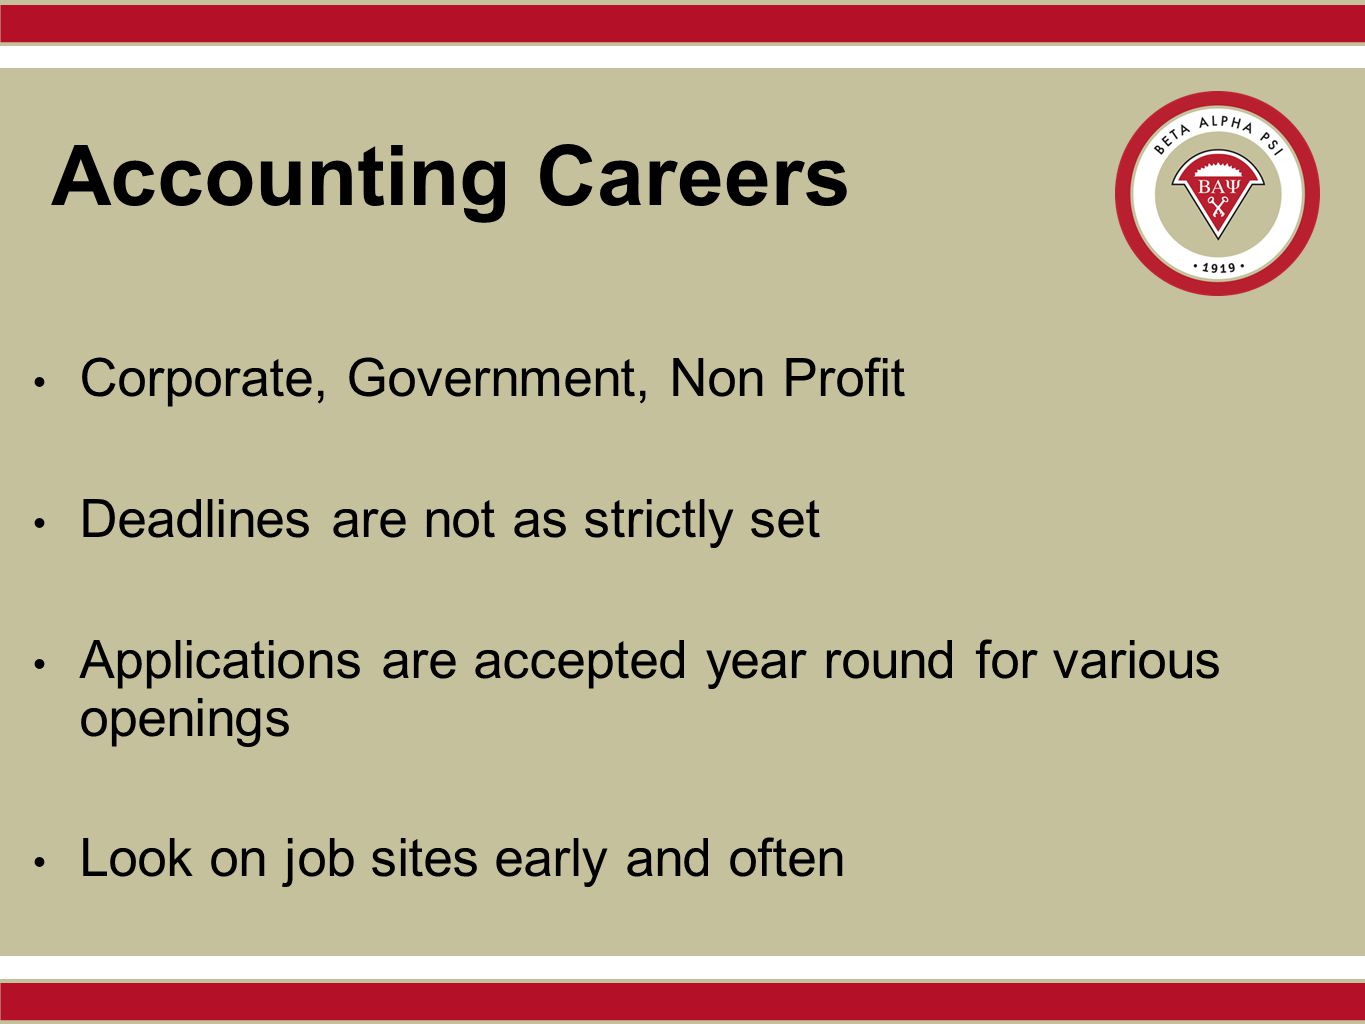 Accounting Careers Corporate, Government, Non Profit Deadlines are not as strictly set Applications are accepted year round for various openings Look on job sites early and often